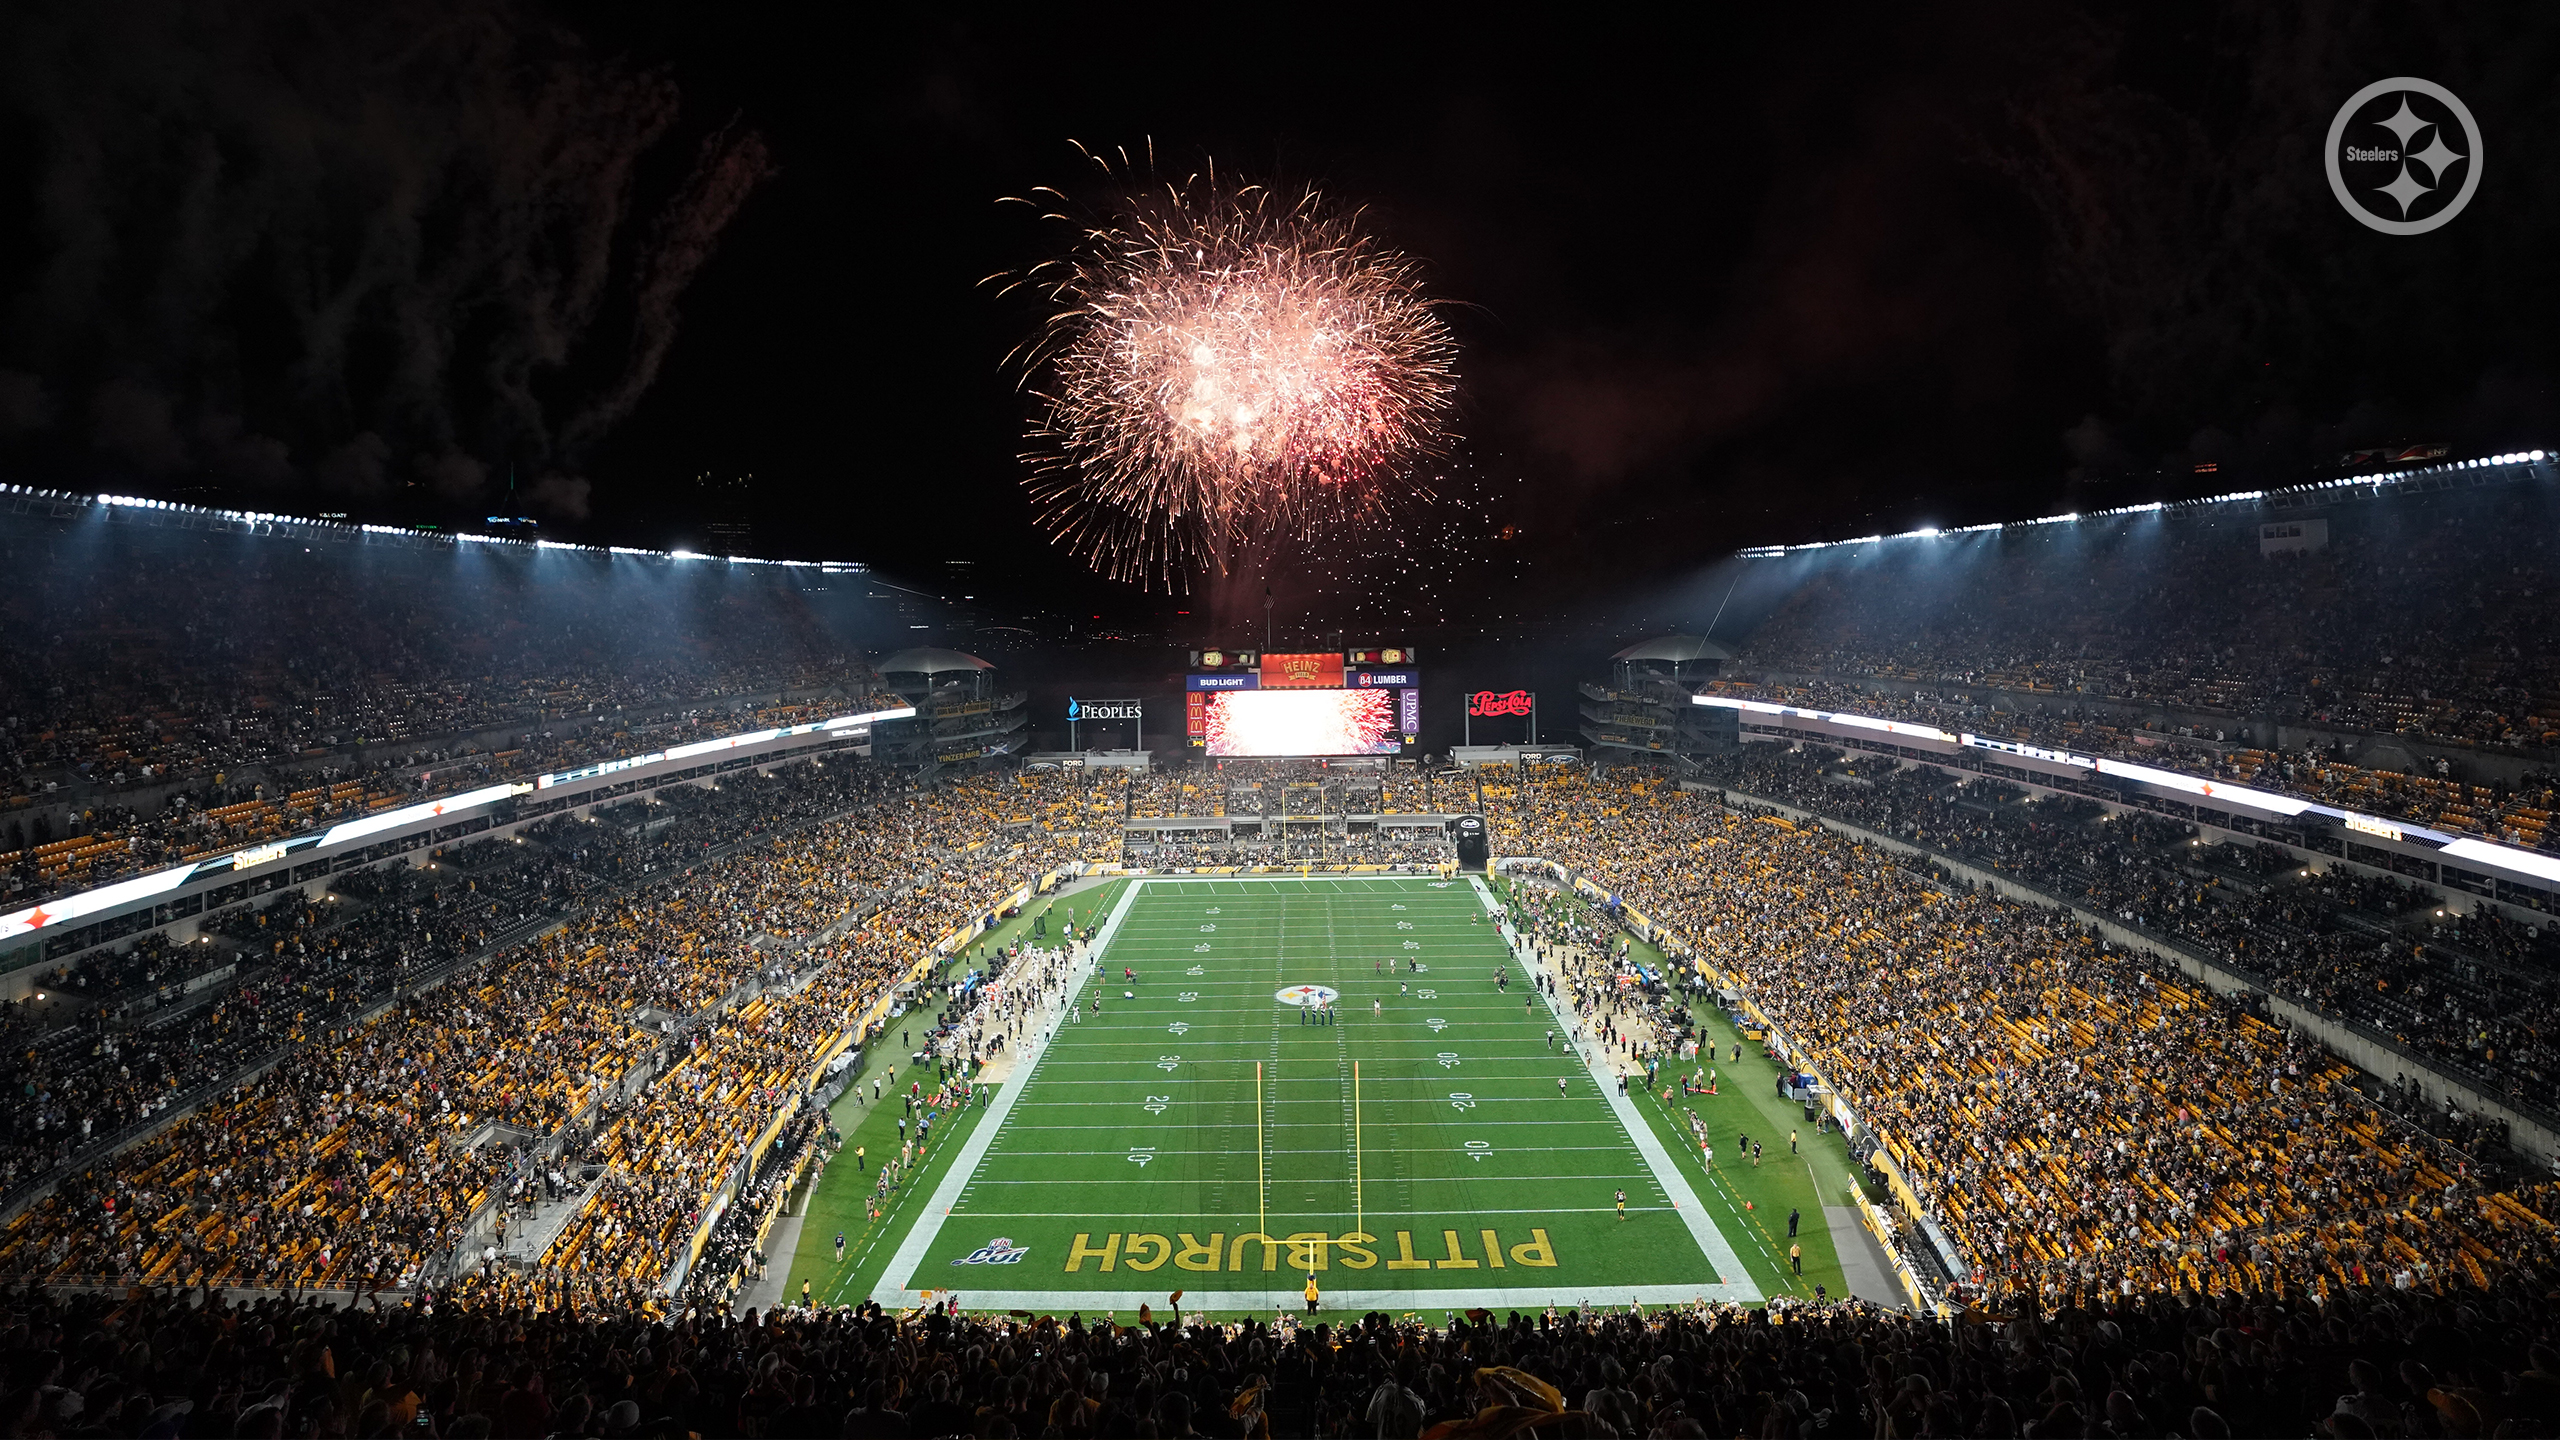 Fireworks over Heinz Field during a night Steelers game